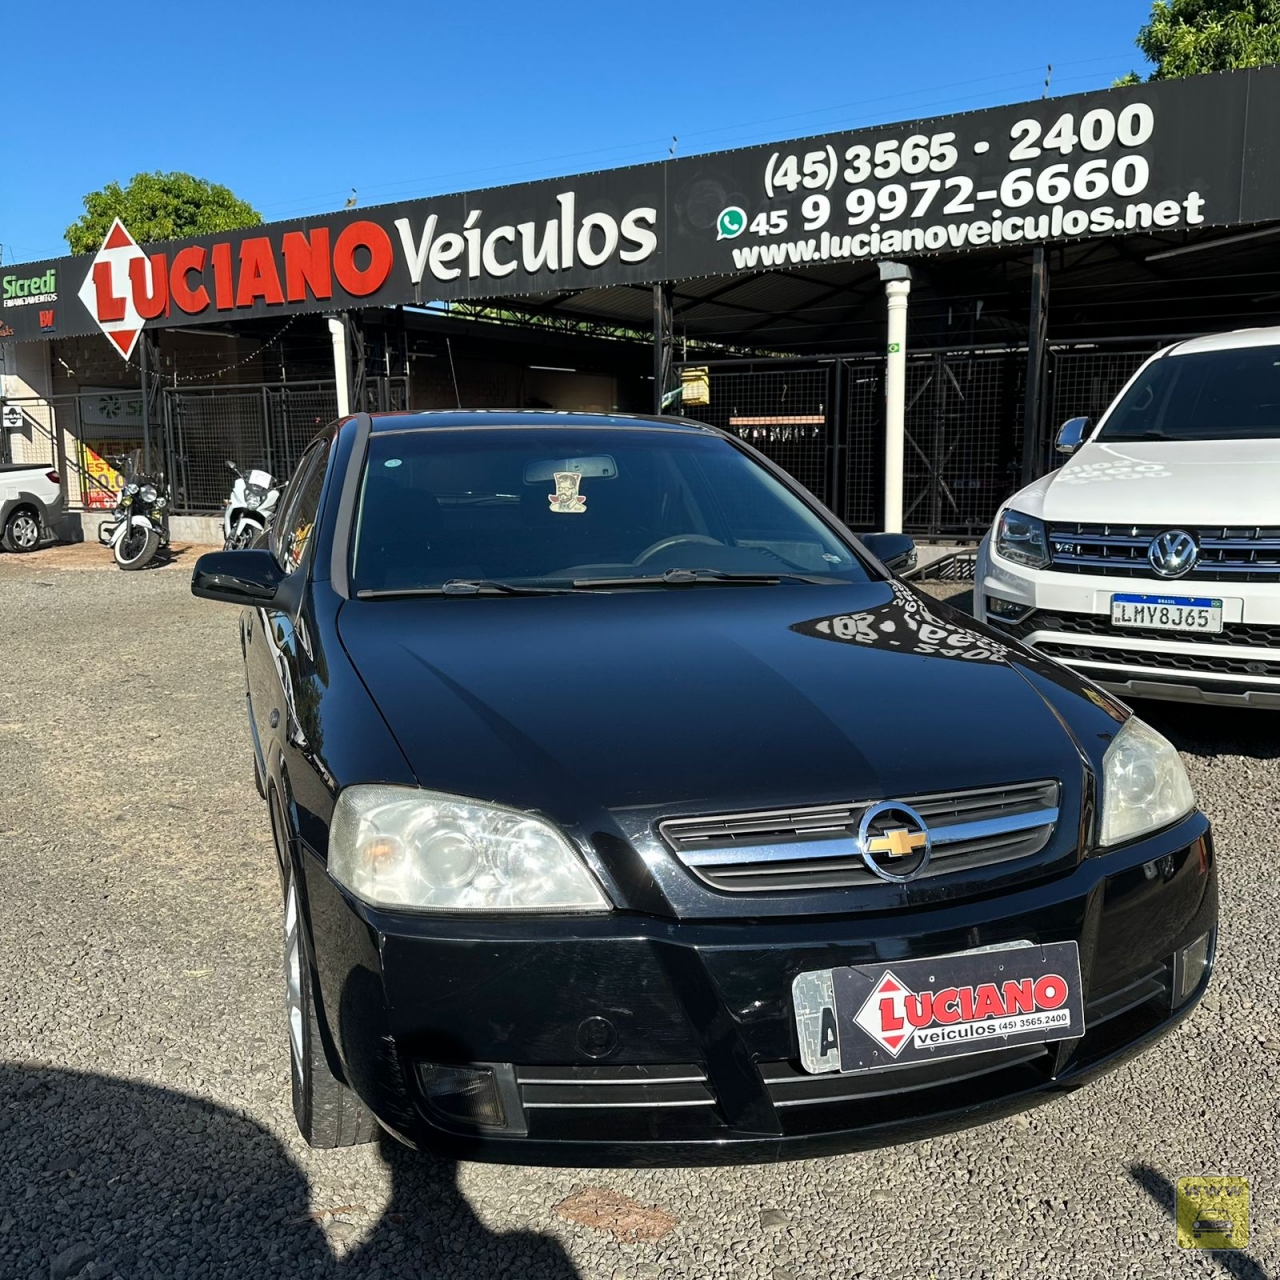 CHEVROLET ASTRA HB ADVANTAGE Luciano Veiculos!